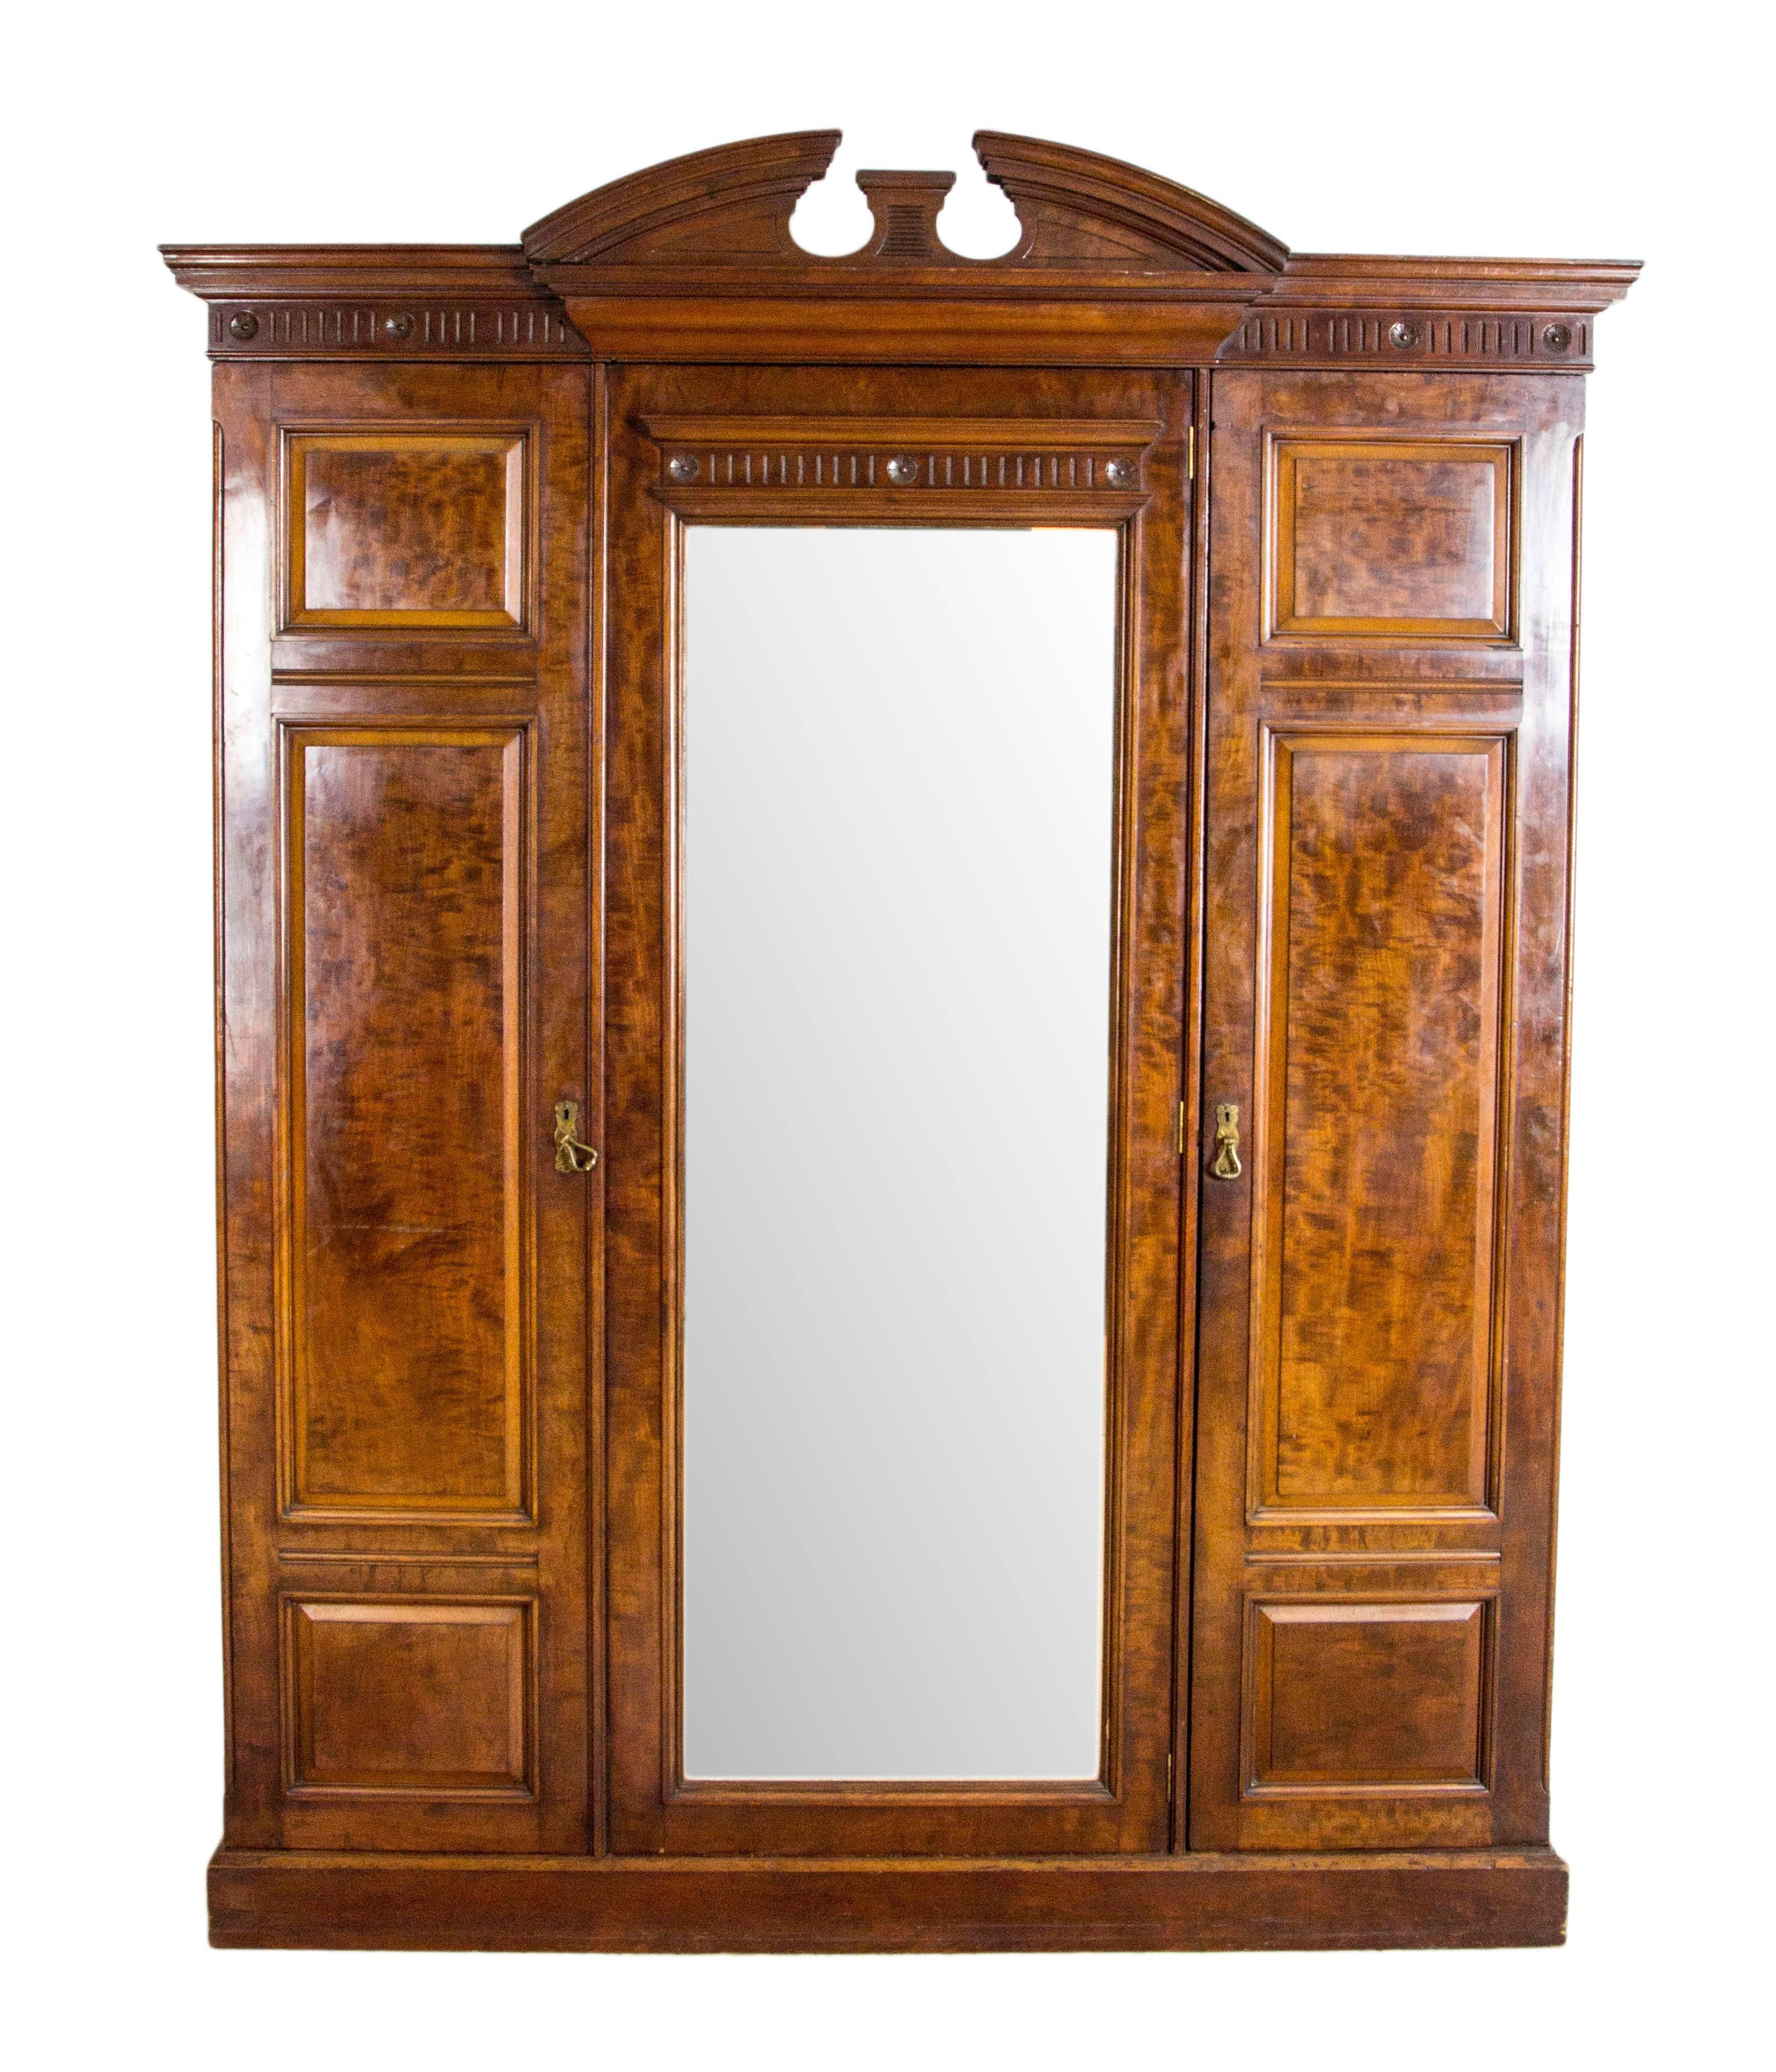 Scotland
1870
Solid walnut original finish
Carved cornice
Double door with beveled mirror
Brass rod and brass hooks inside
Single drawers below
Made by Paterson, Smith, Innes of Edinburgh
Right cabinet fitted with single shelf, three slide